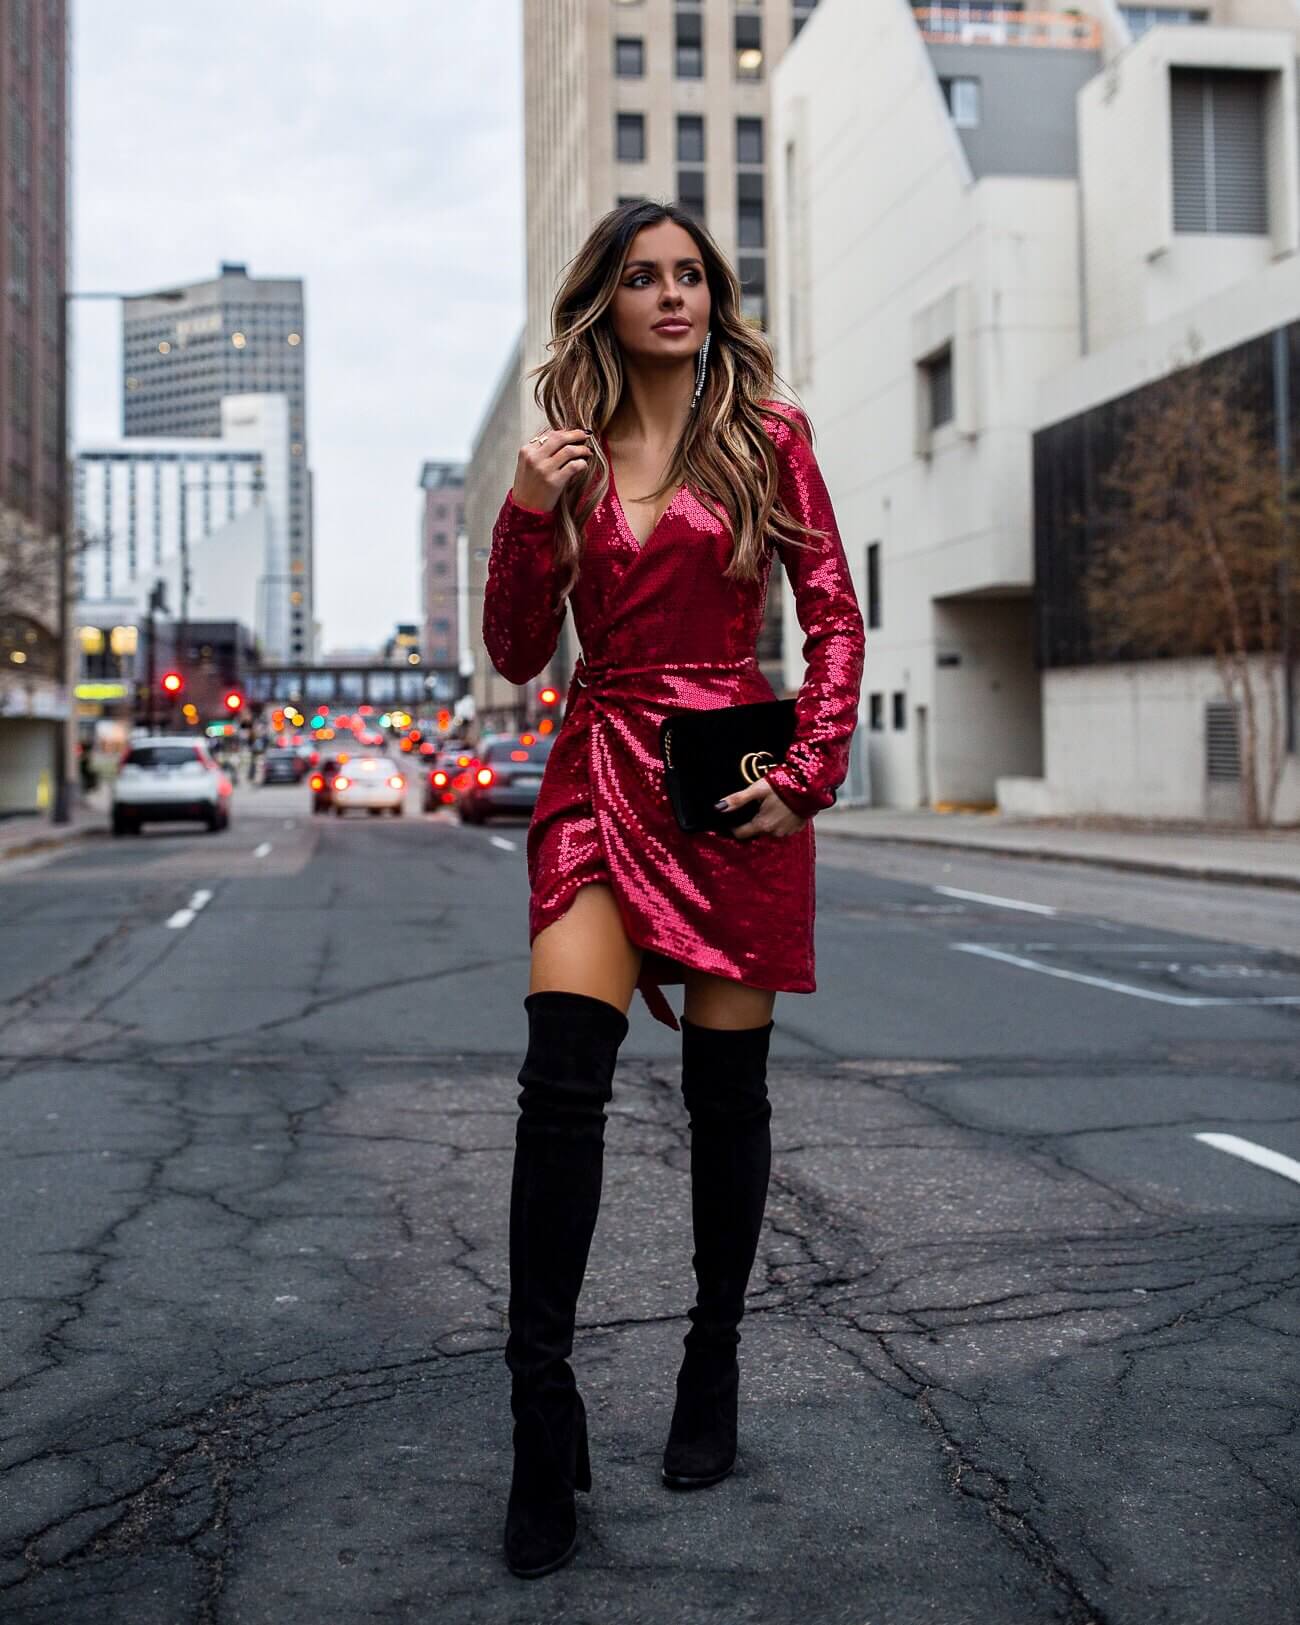 fashion blogger mia mia mine wearing a red sequin dress and over-the-knee stuart weitzman over-the-knee boots